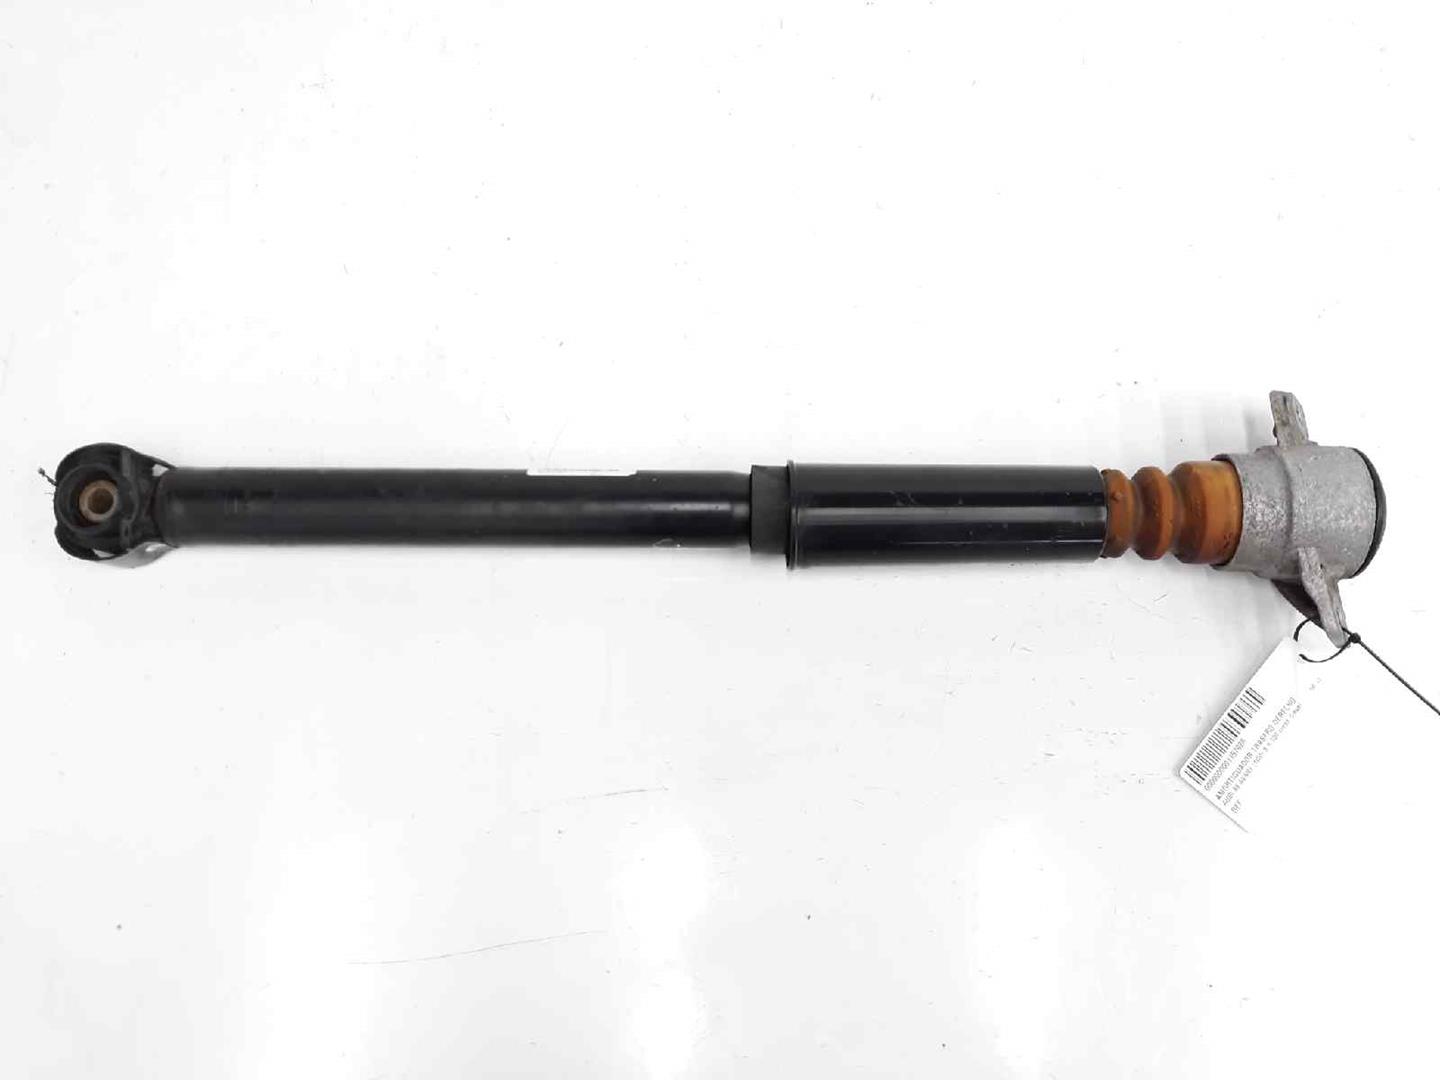 AUDI A7 C7/4G (2010-2020) Rear Right Shock Absorber 4G5513035C, 4G5513035C 19657296